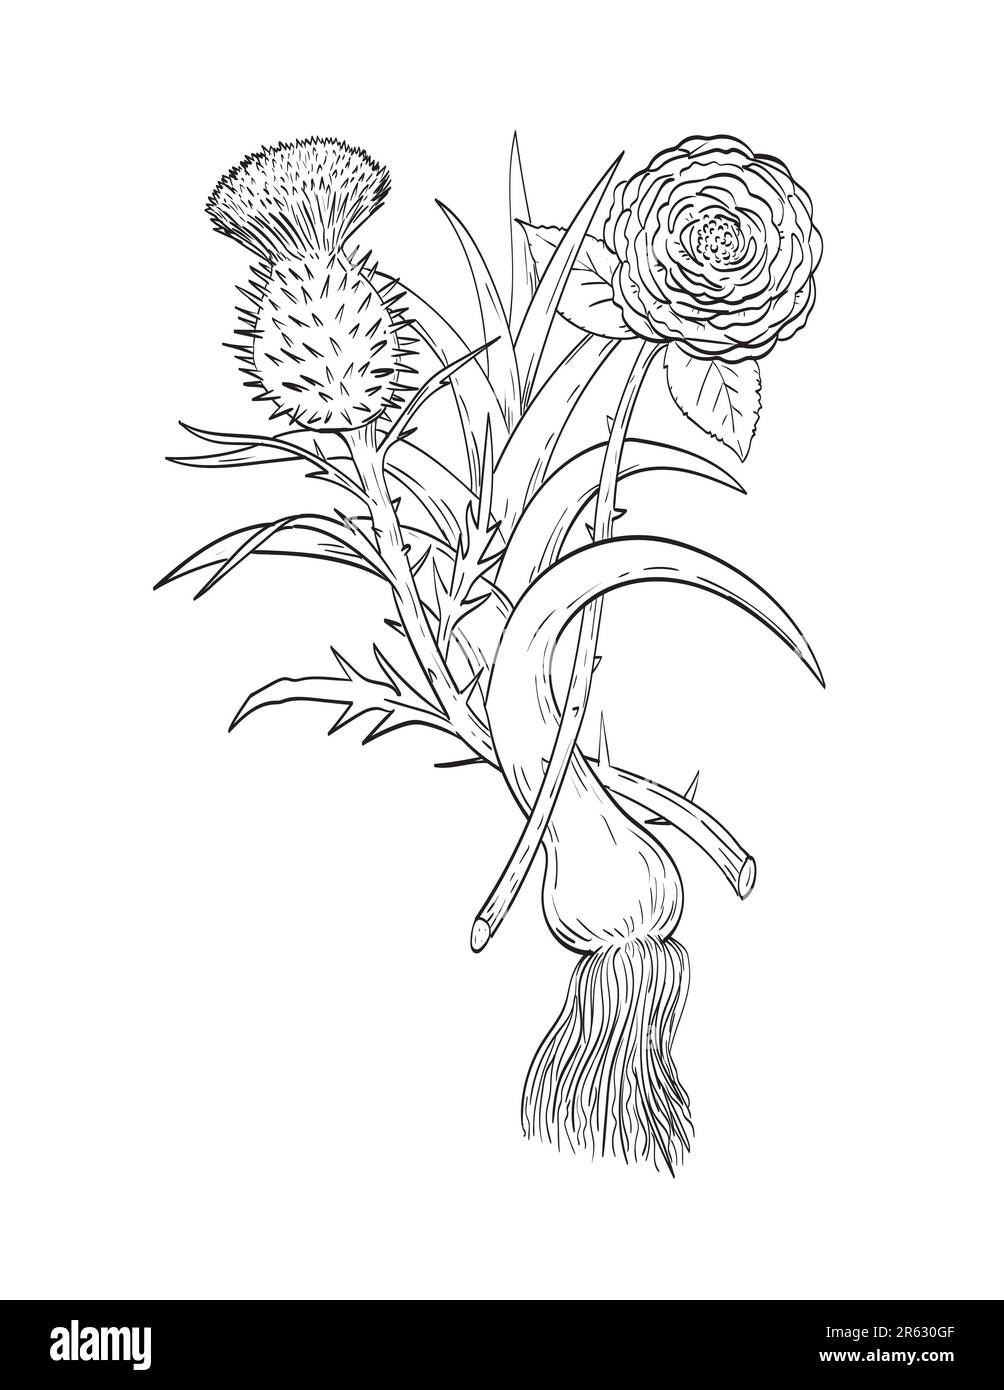 Line drawing sketch style illustration of four emblems representing the nations of Great Britain GB, English rose, Welsh leek and the Scottish thistle Stock Photo